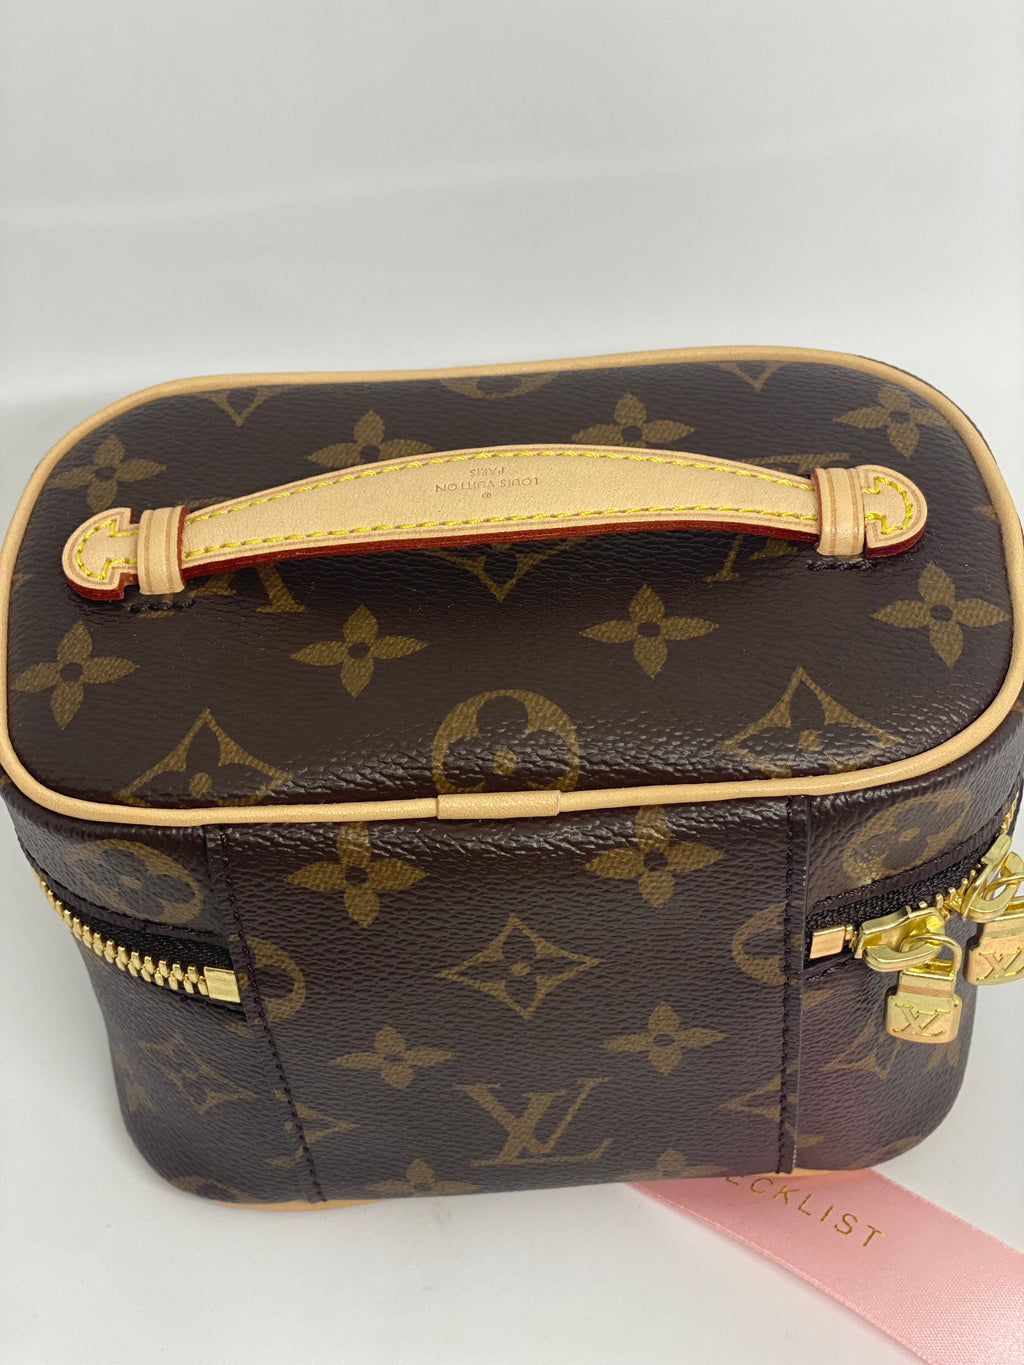 Louis Vuitton Nice Cosmetic Case Review - Collecting Louis Vuitton